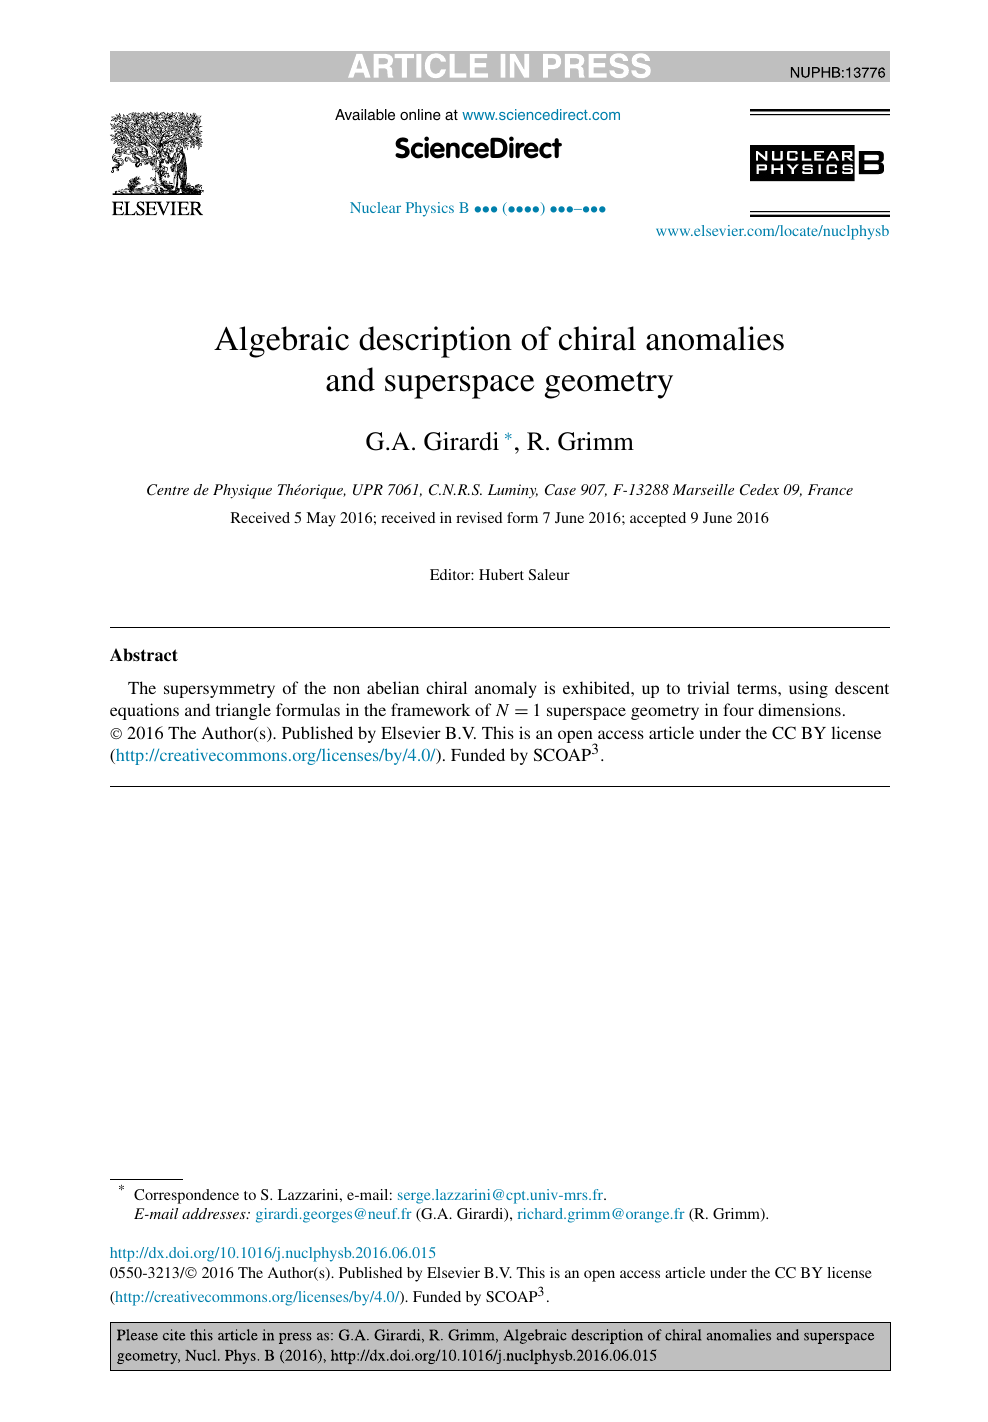 Algebraic Description Of Chiral Anomalies And Superspace Geometry Topic Of Research Paper In Physical Sciences Download Scholarly Article Pdf And Read For Free On Cyberleninka Open Science Hub